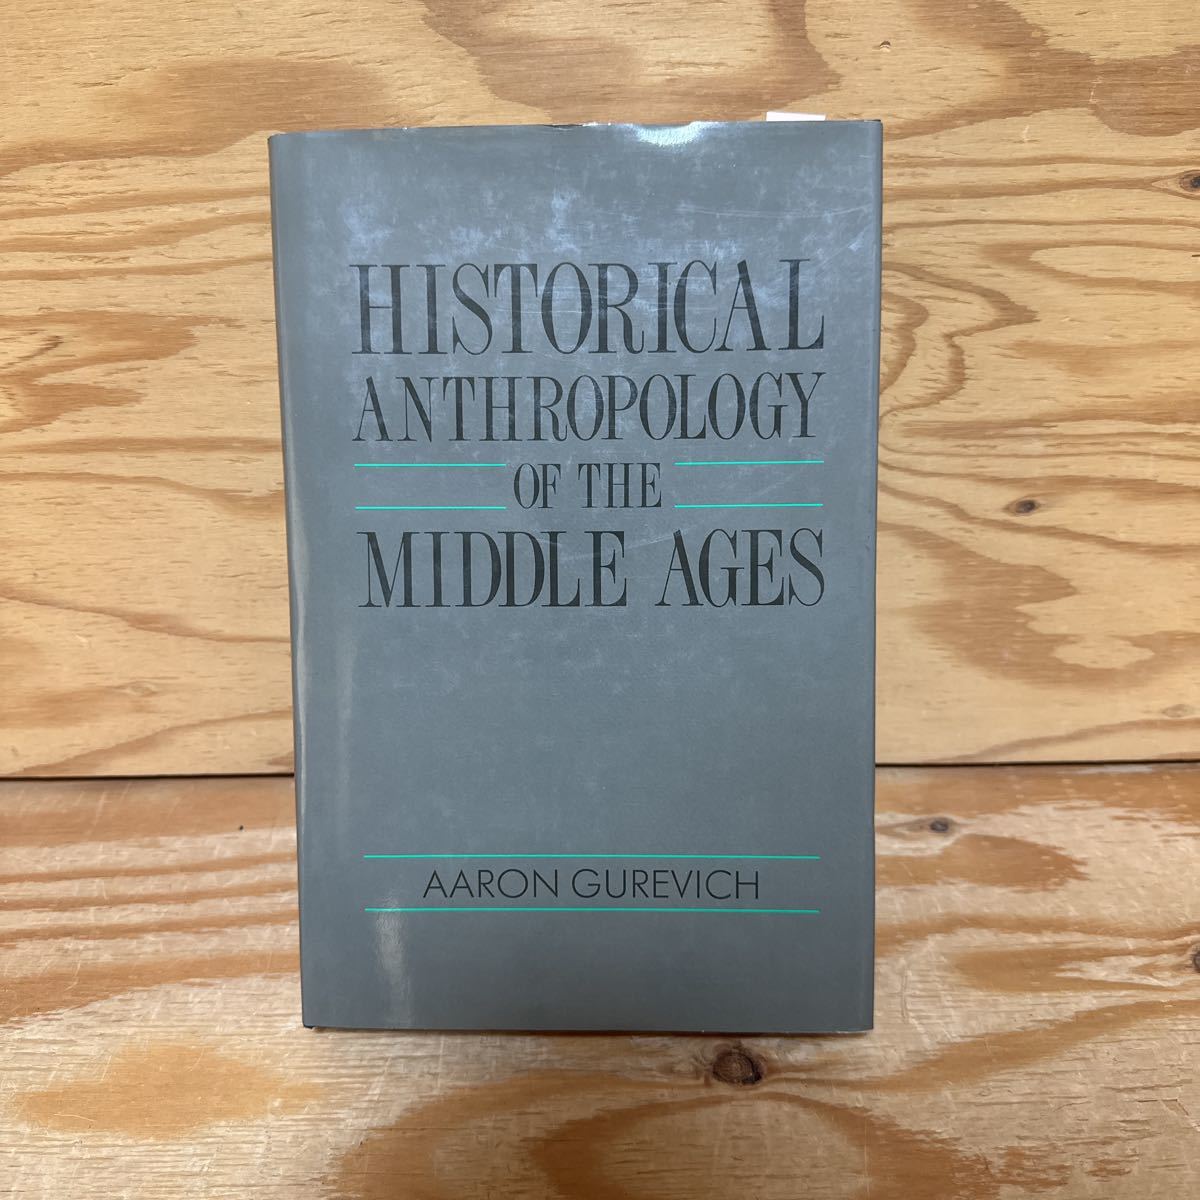 Y90M4-230928 レア［HISTORICAL ANTHROPOLOGY OF THE MIDDLE AGES AARON GUREVICH］中世の歴史人類学_画像1